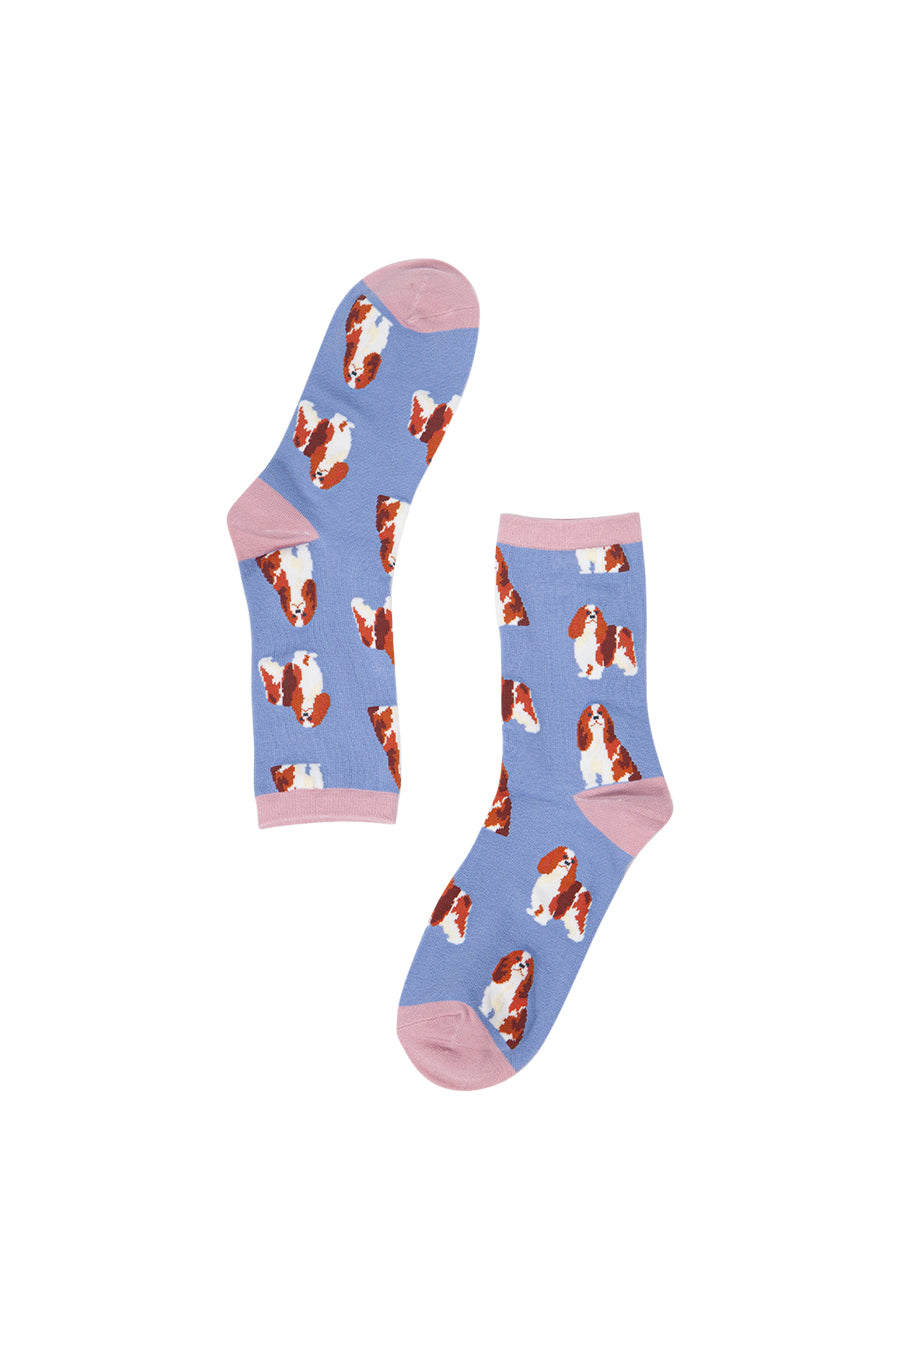 king charles spaniel bamboo ankle socks in lilac and pink